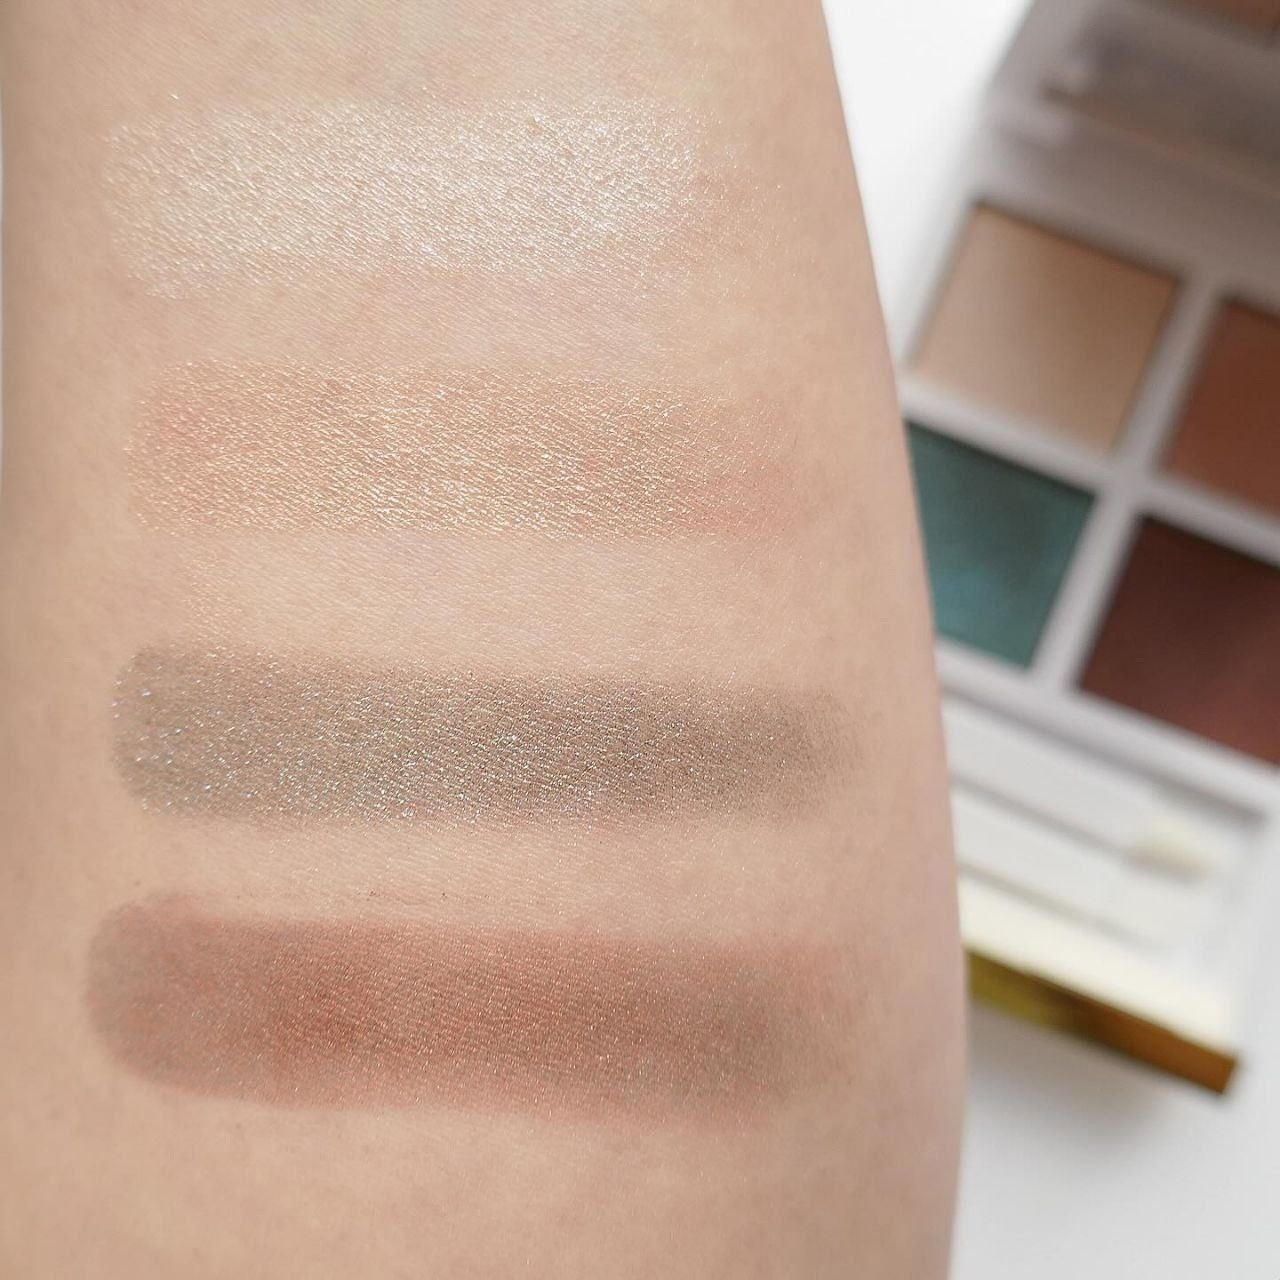 Tom Ford Soleil Eye Color Quad Summer 2024 - Swatches